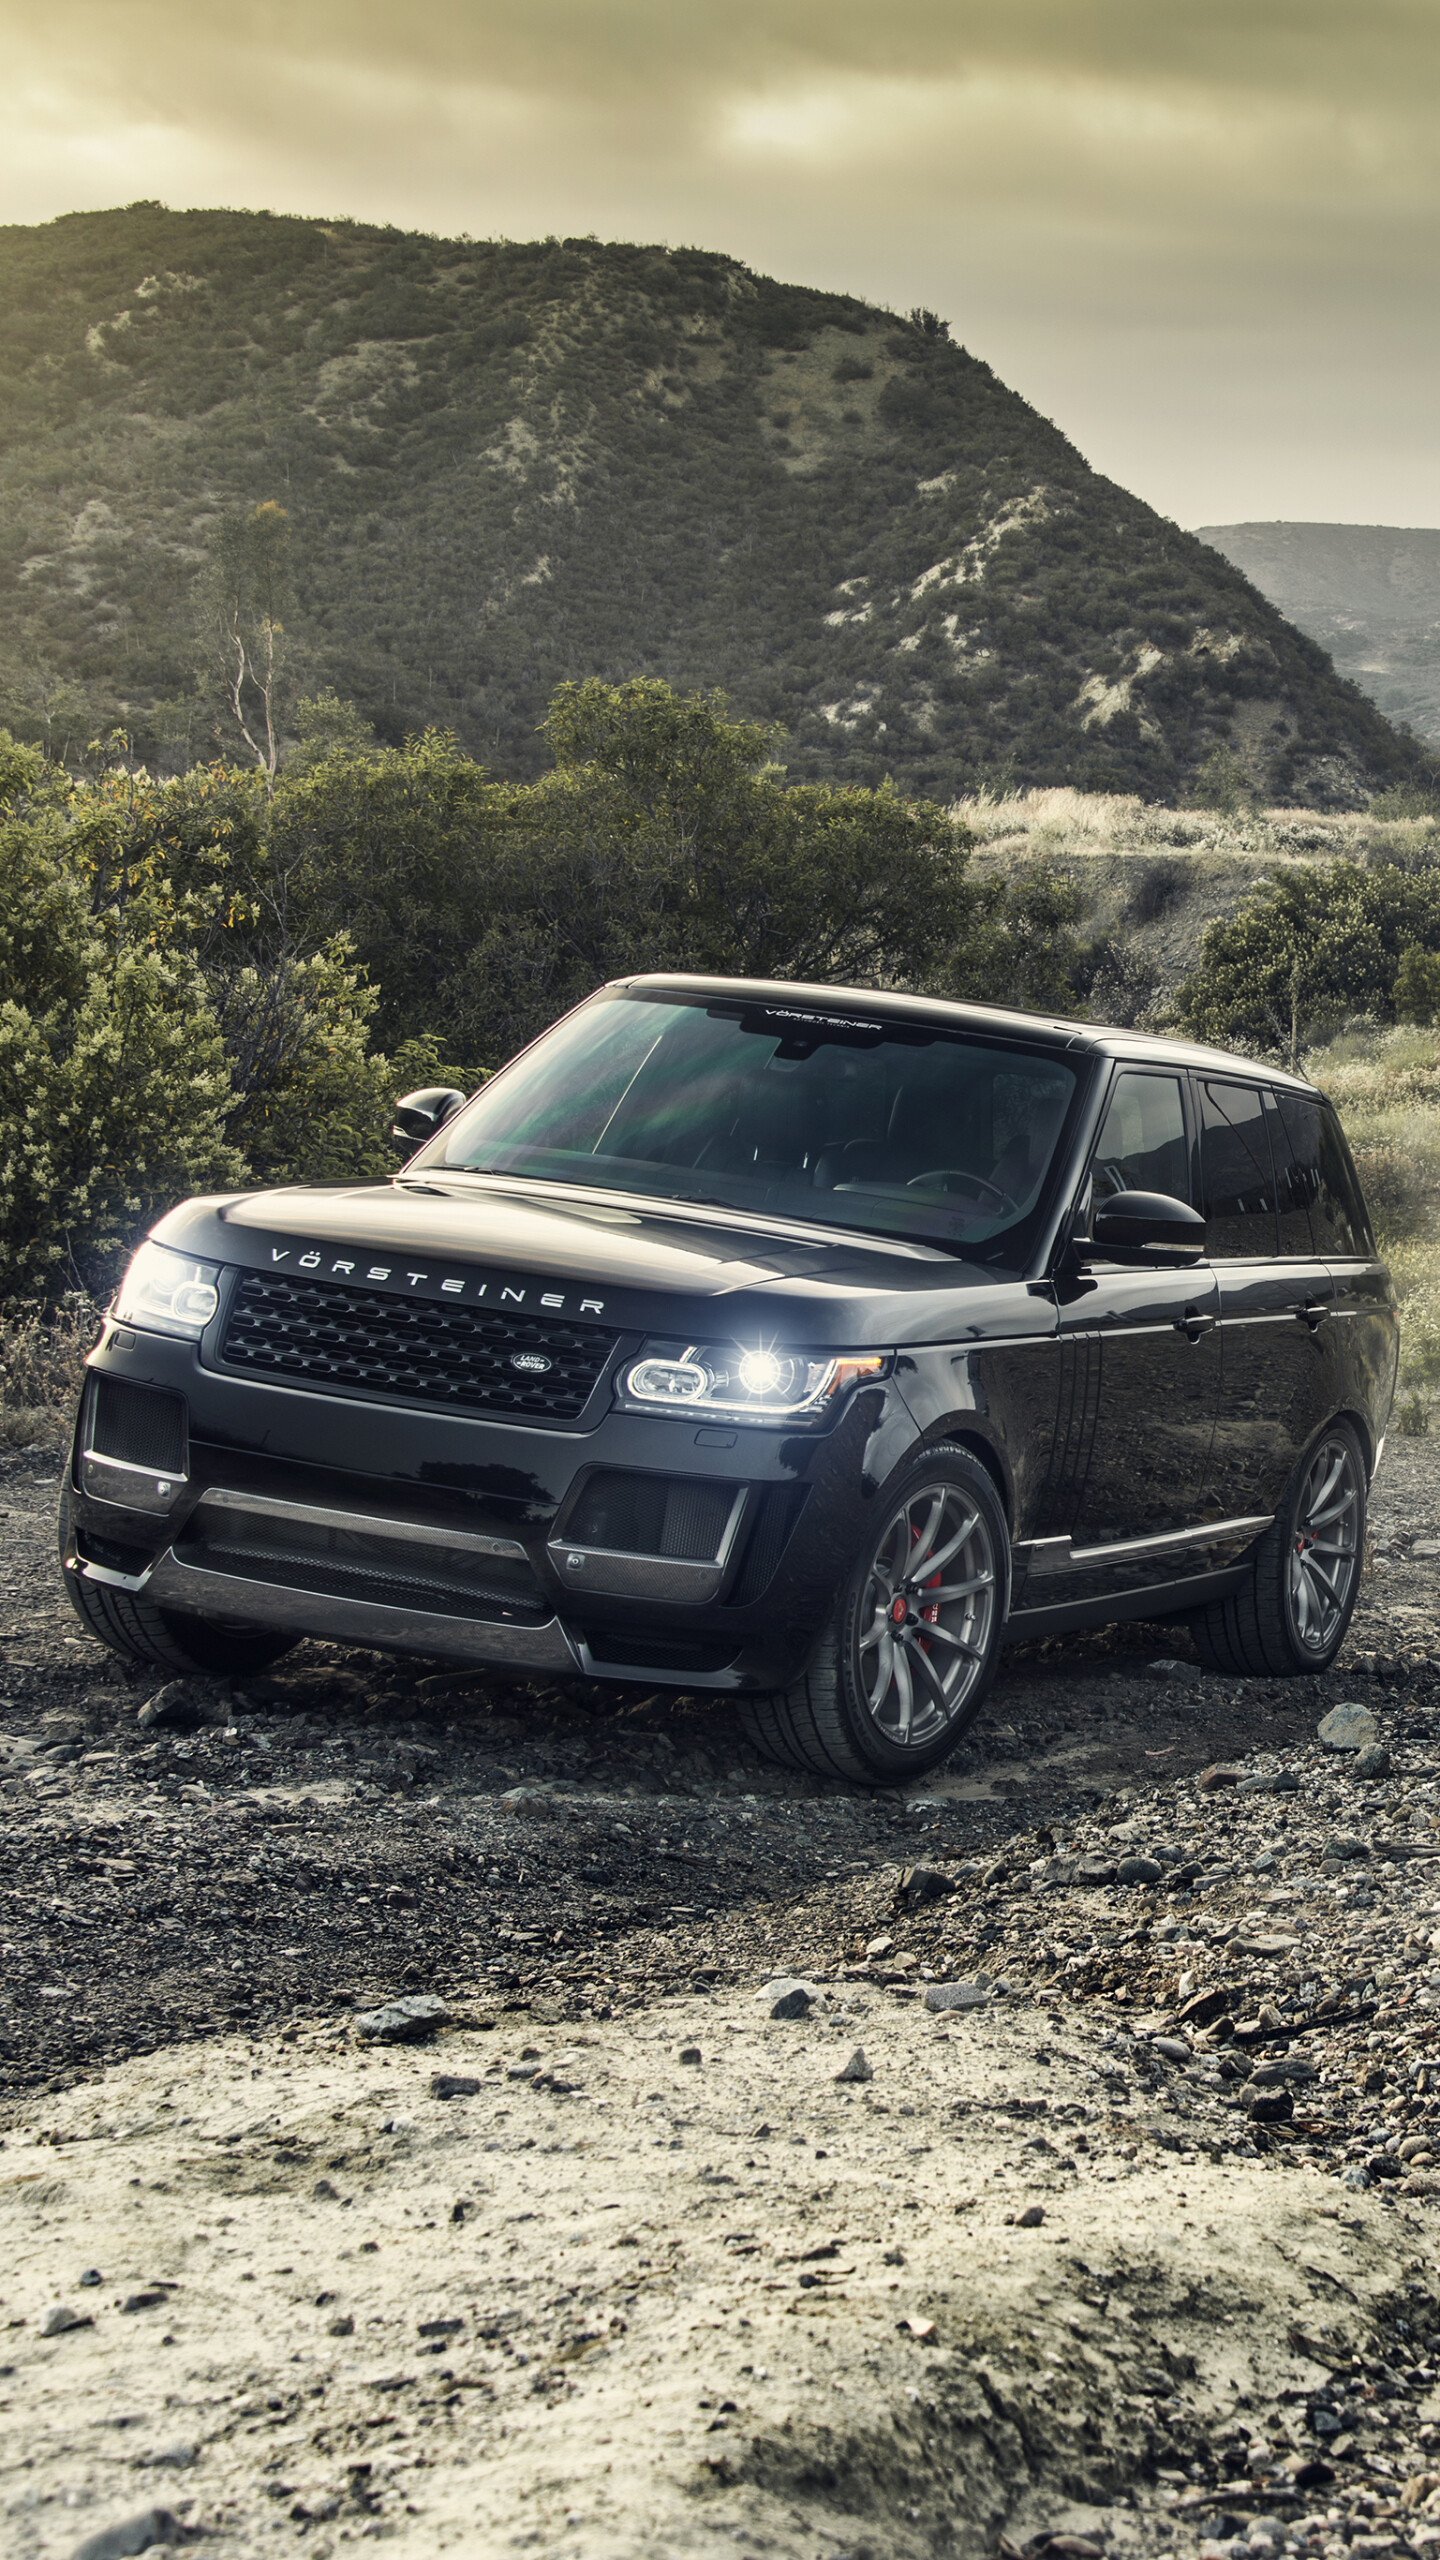 Range Rover: Vehicles, The first-generation was available only in a 2-door body until 1981. 1440x2560 HD Wallpaper.